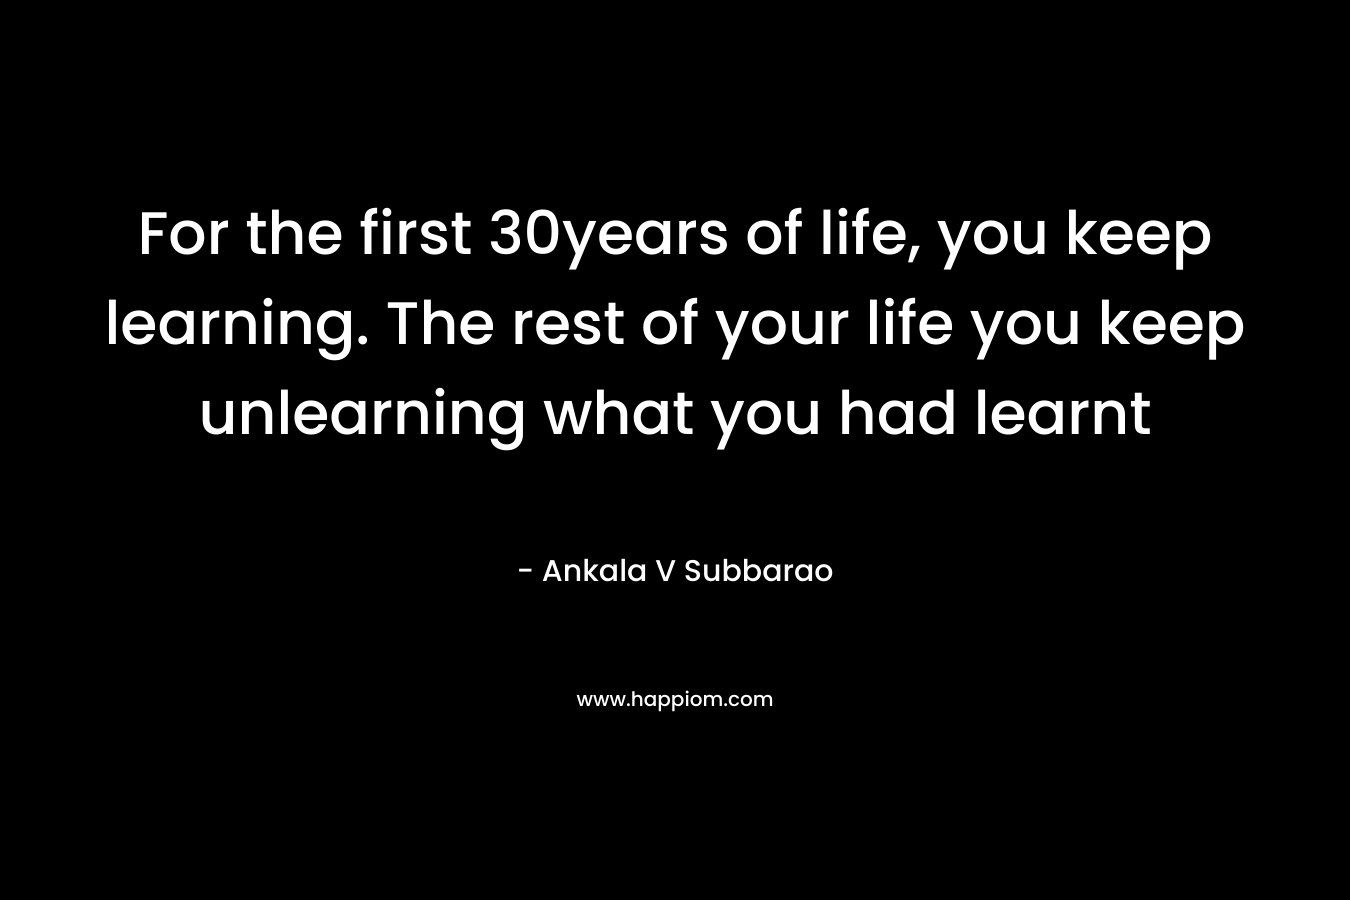 For the first 30years of life, you keep learning. The rest of your life you keep unlearning what you had learnt